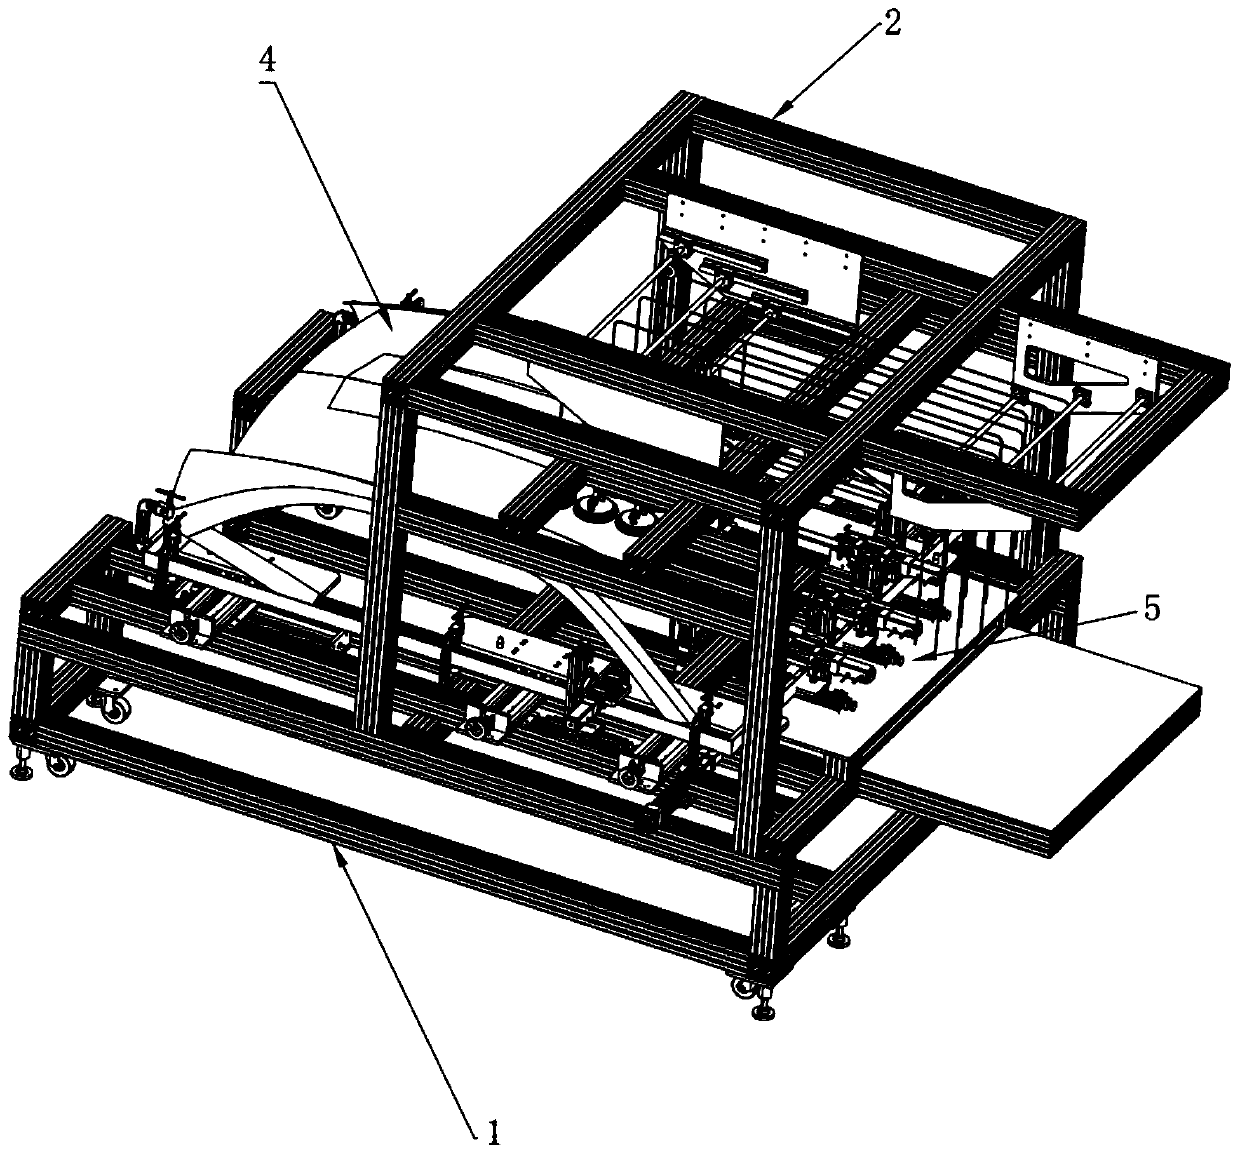 Pressure and displacement testing mechanism for vehicle sunroof